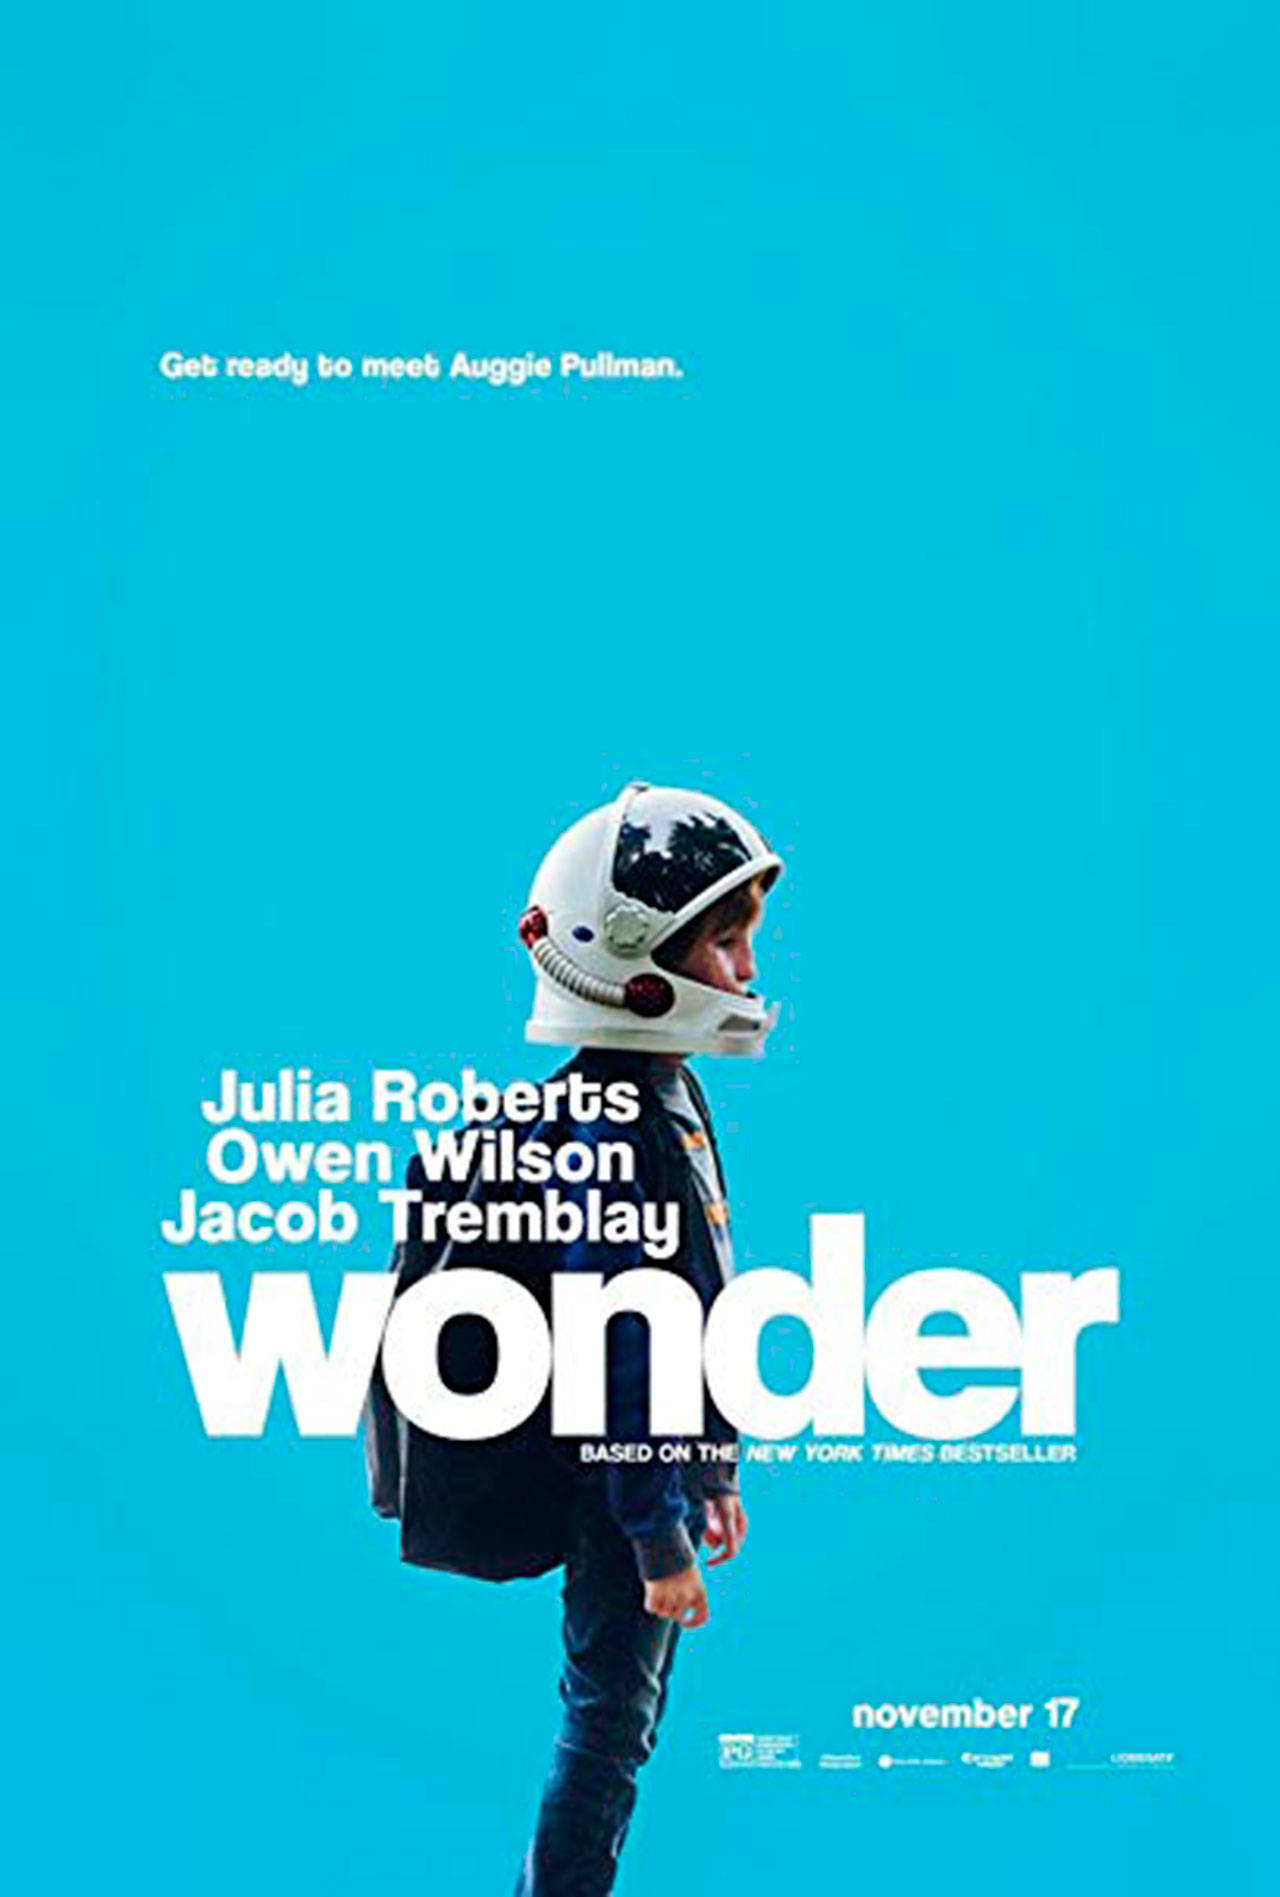 Image courtesy of Lionsgate | “Wonder” (2017) is the latest film on tap in the Bainbridge Island Metro Park & Recreation District summer film program Movies in the Park on Friday, Aug. 24.